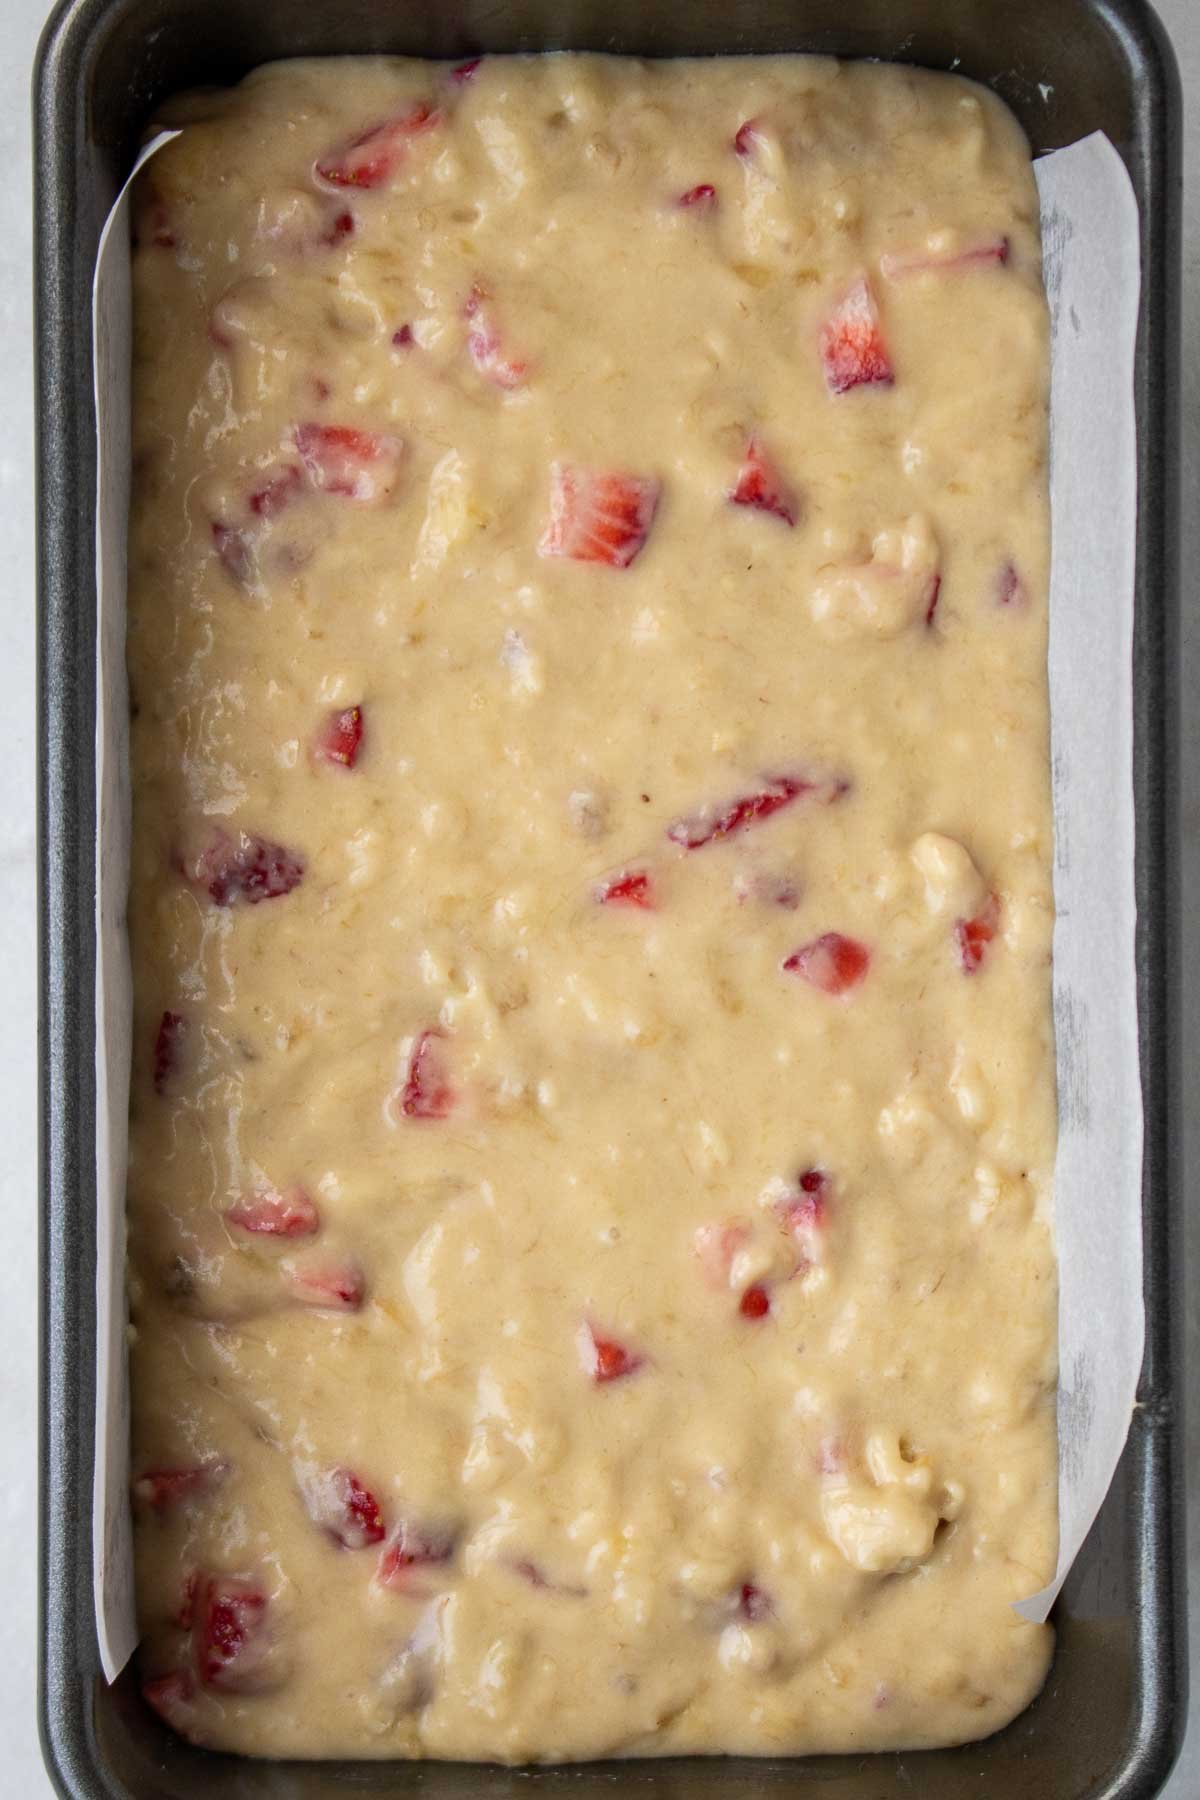 Image of strawberry banana bread in a loaf baking pan.